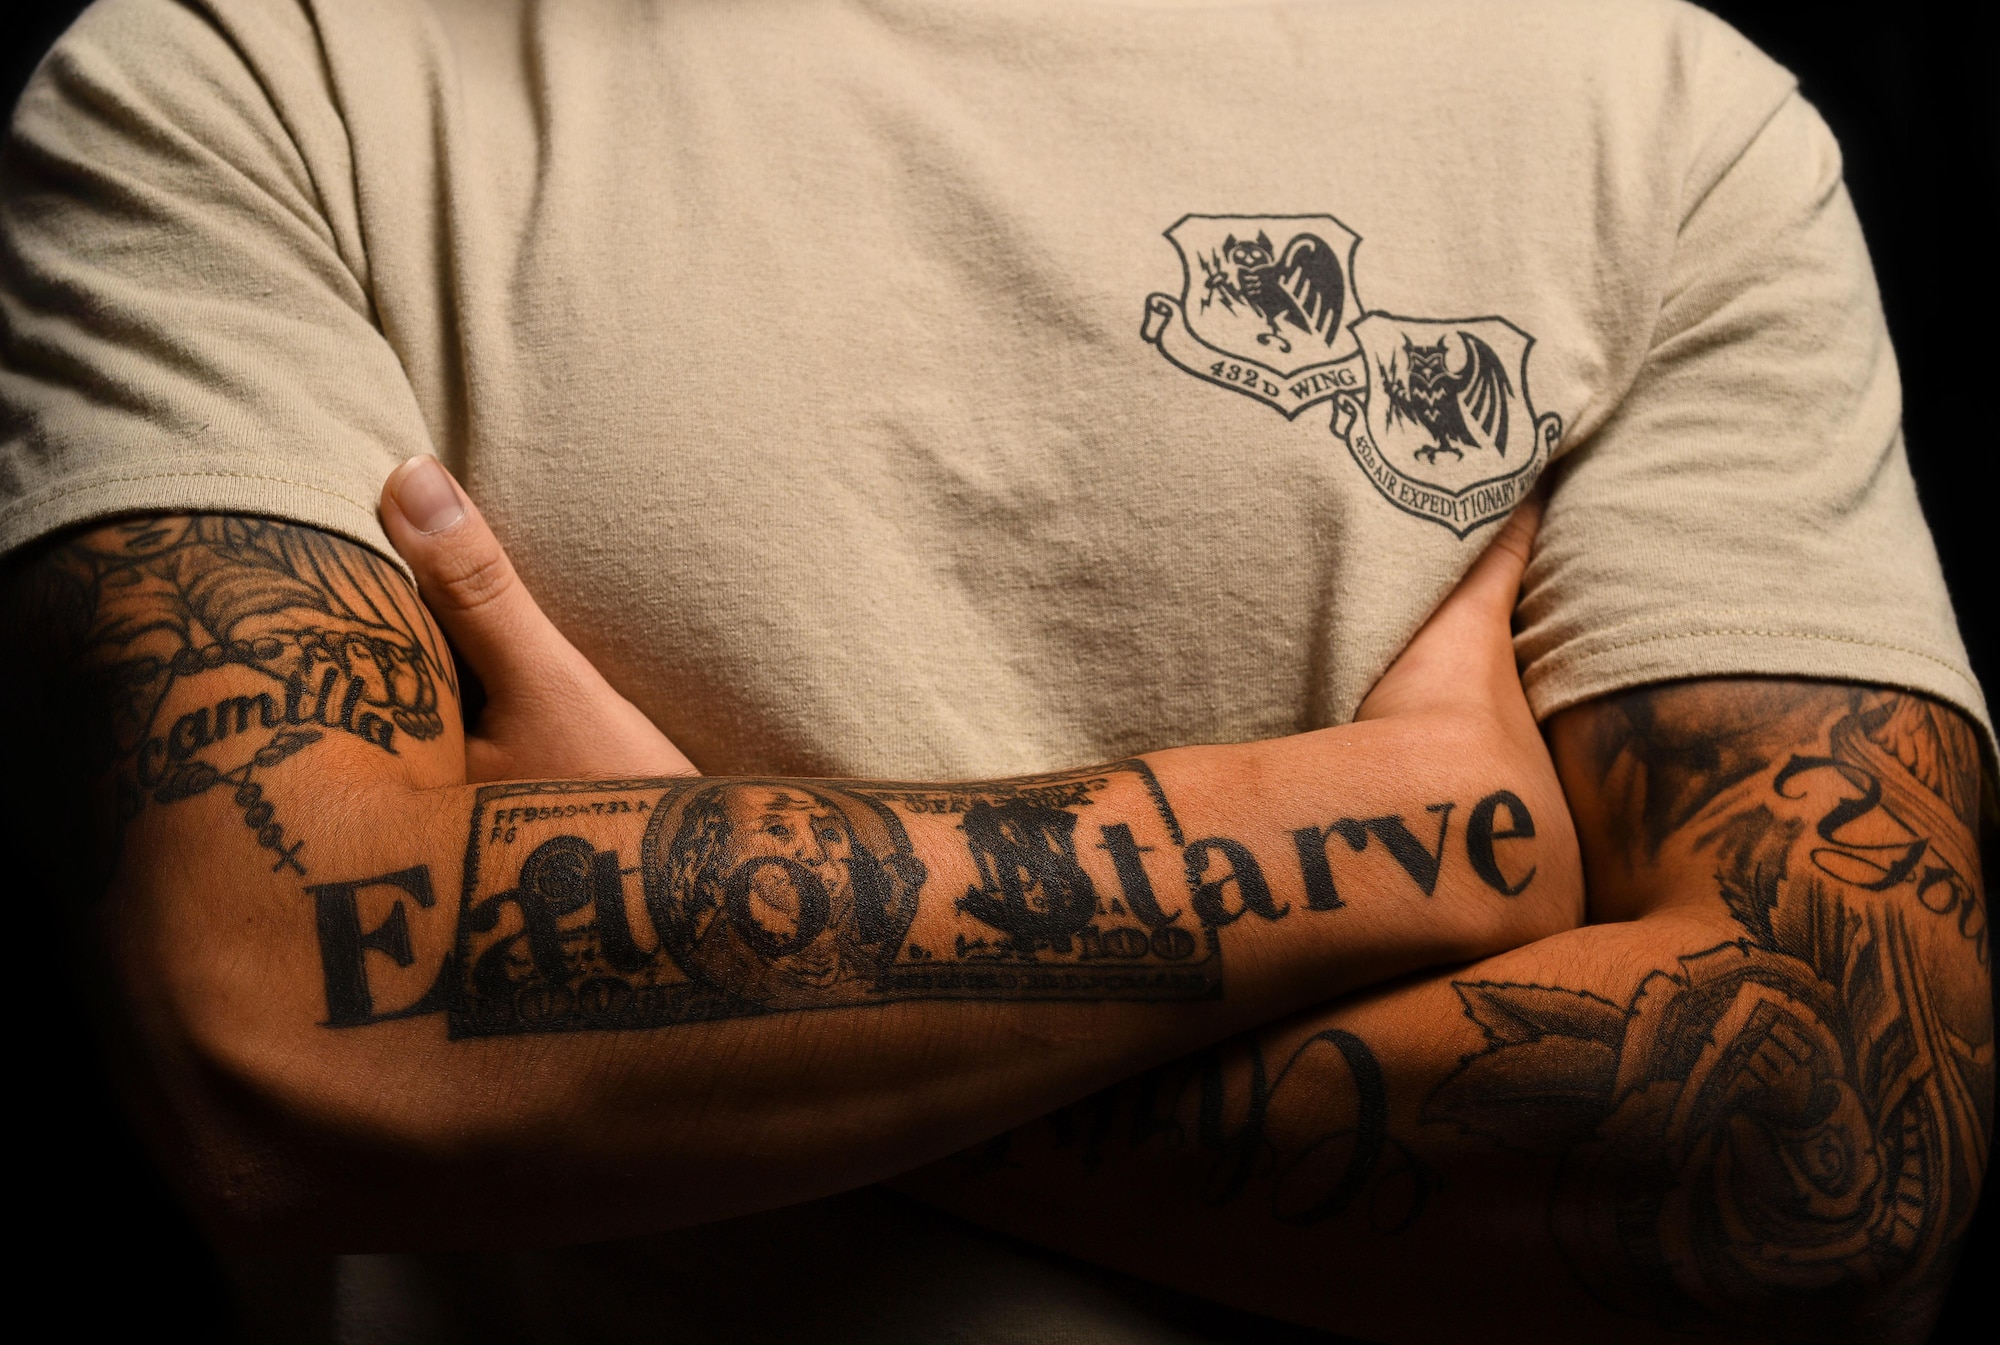 Senior Airman DelAngel, 432nd Wing administration journeyman, displays his tattoos Jan. 18, 2017, at Creech Air Force Base, Nev. As of Feb. 1, 2017, a new tattoo policy has taken effect as a result of the Air Force’s efforts in broadening the pool of applicants and retaining Airmen. DelAngel believes his ethos, ‘Eat or starve,’ represents his hard-working mentality and culture. (U.S. Air Force photo by Airman 1st Class James Thompson)